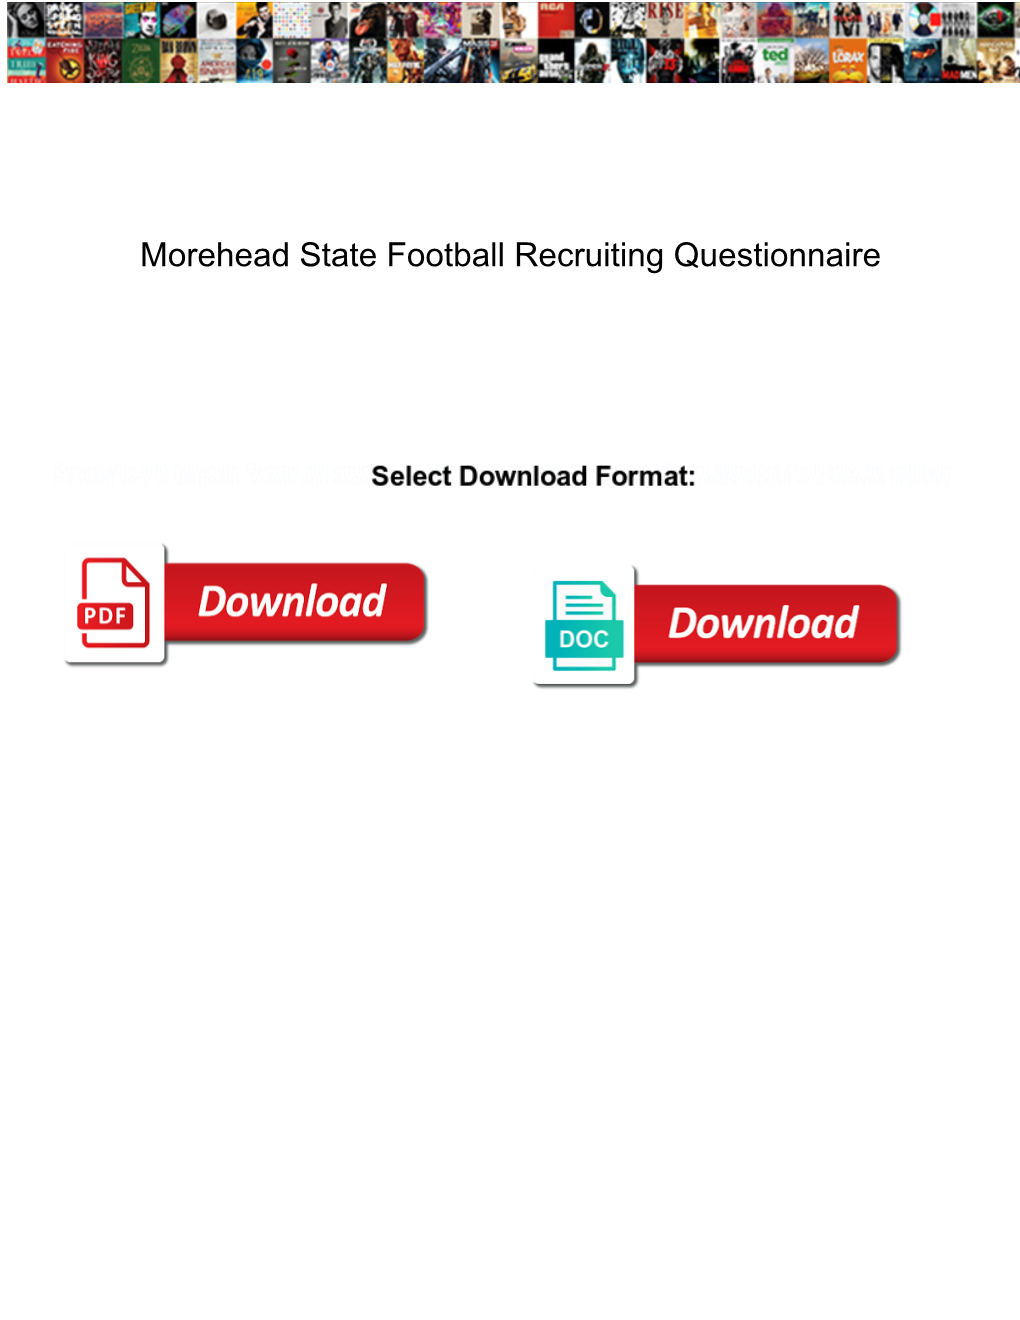 Morehead State Football Recruiting Questionnaire